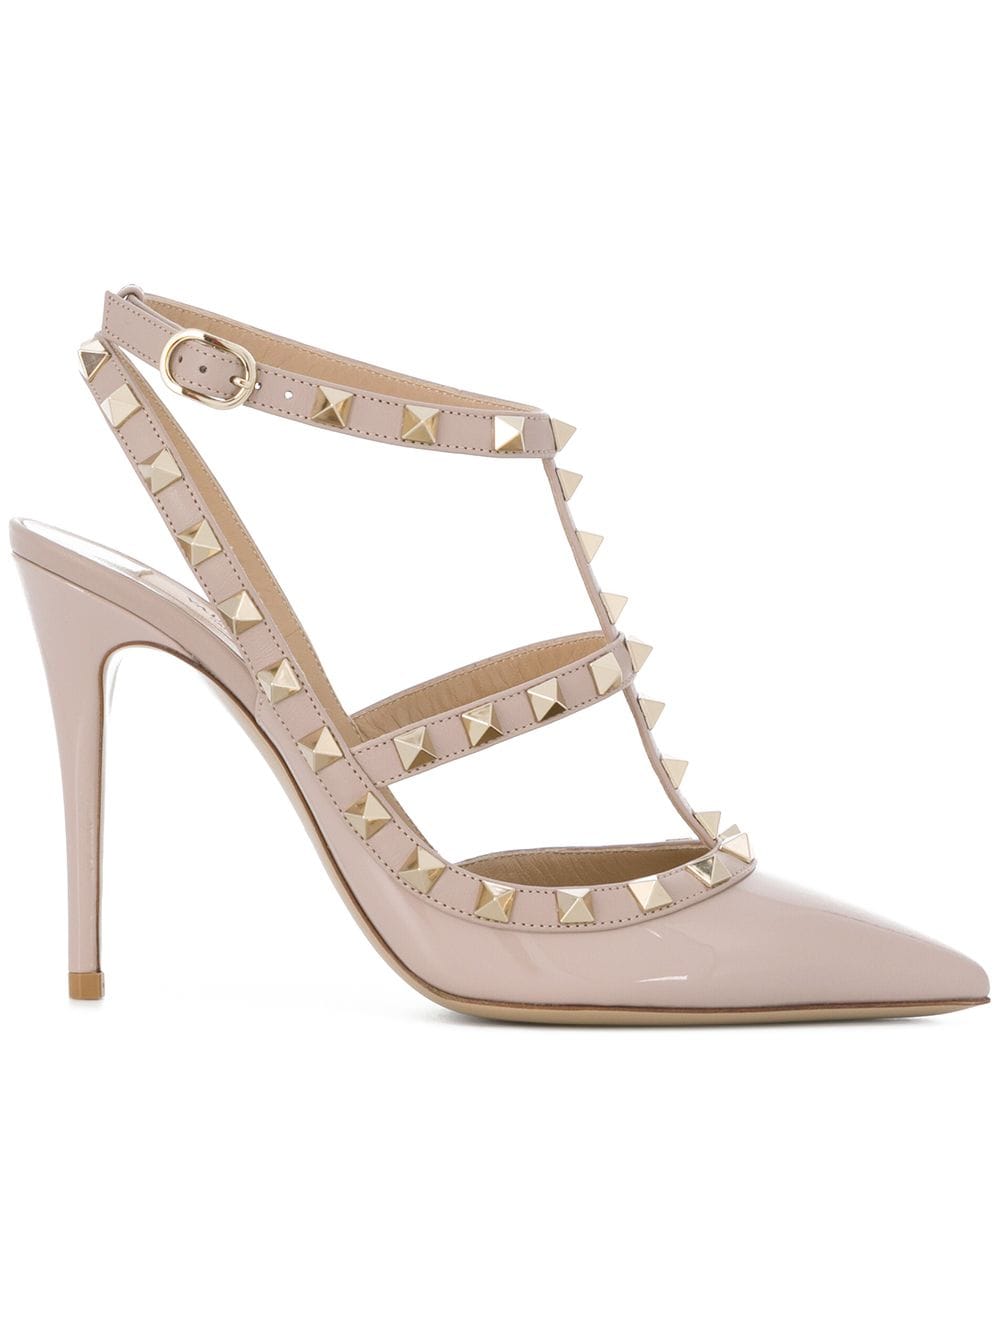 Powder Pink Patent Leather Rockstud Pumps for Women